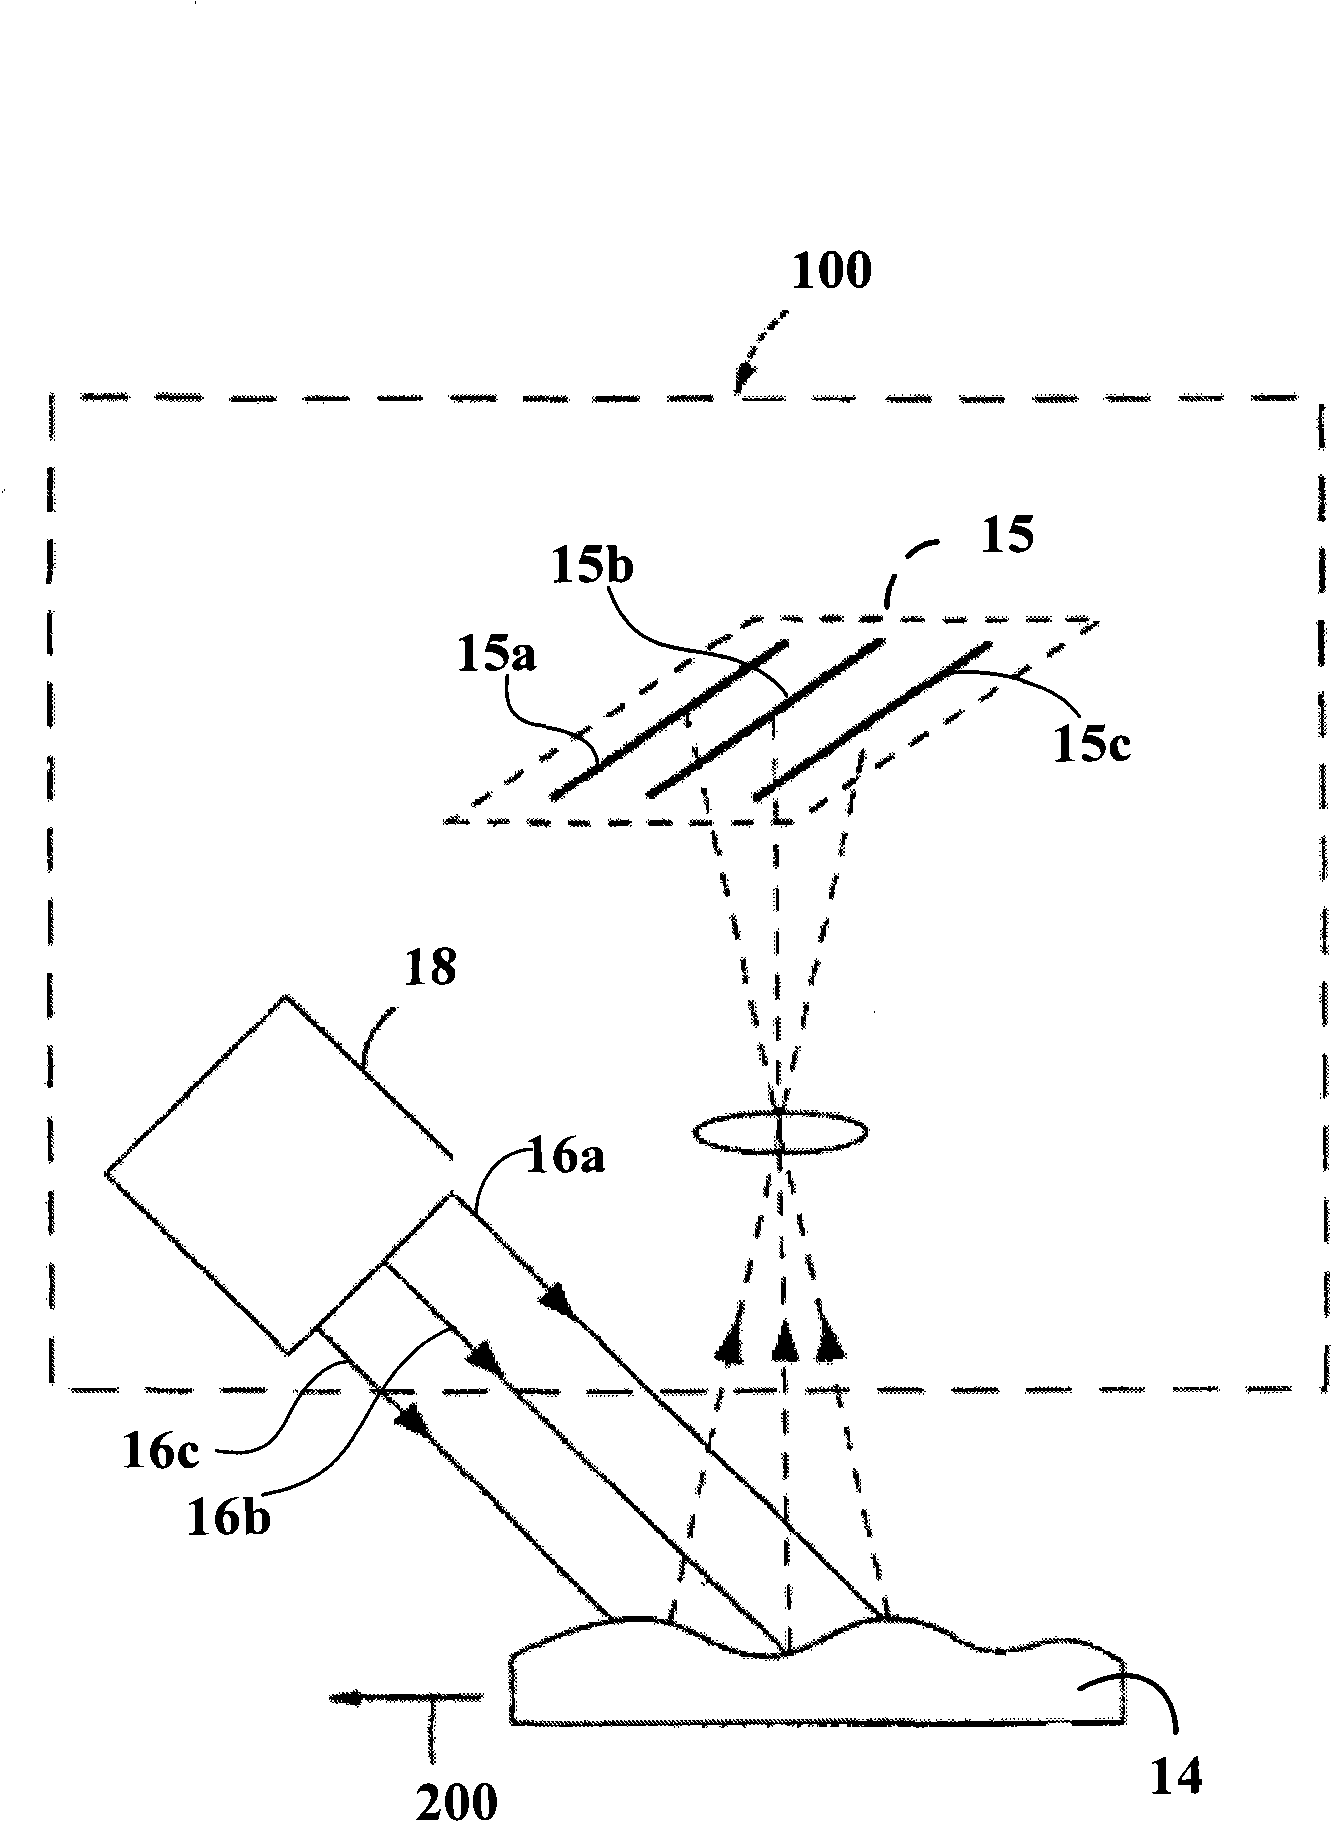 System for measuring stereo object